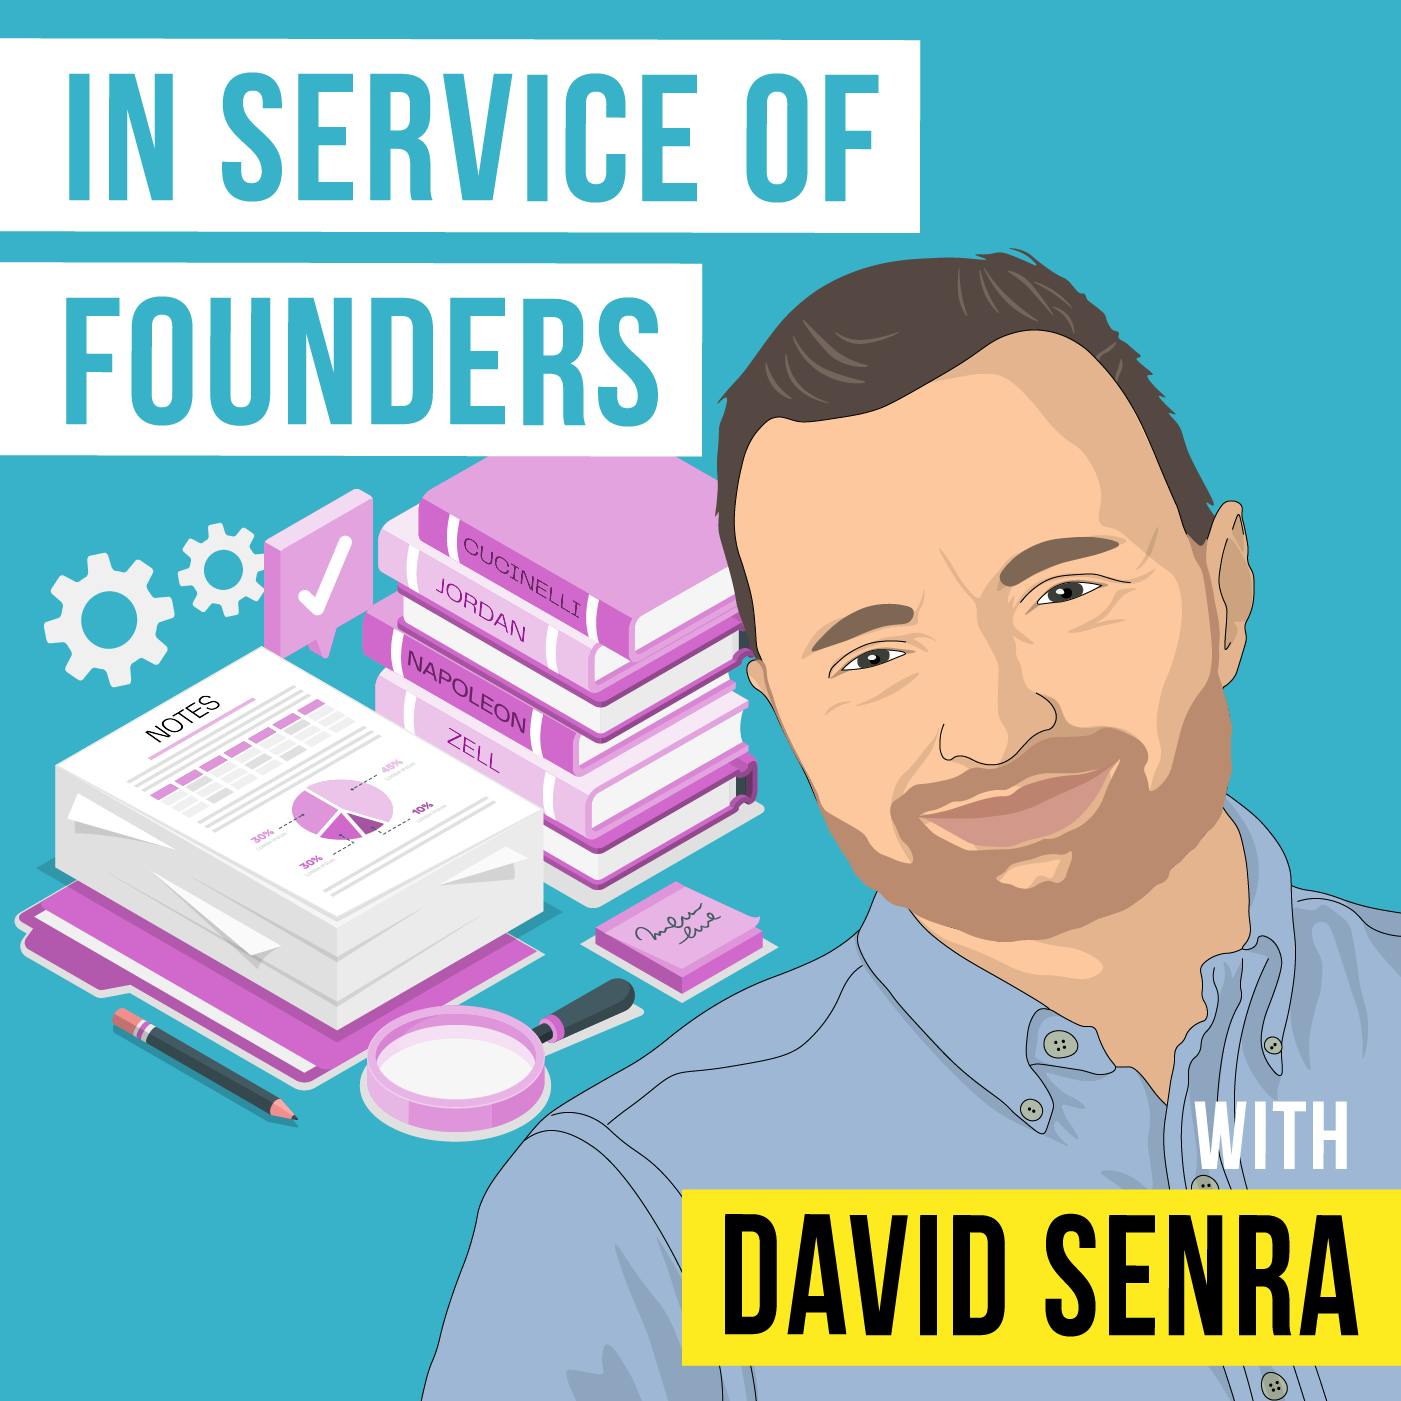 David Senra - In Service of Founders - [Invest Like the Best, EP.343]